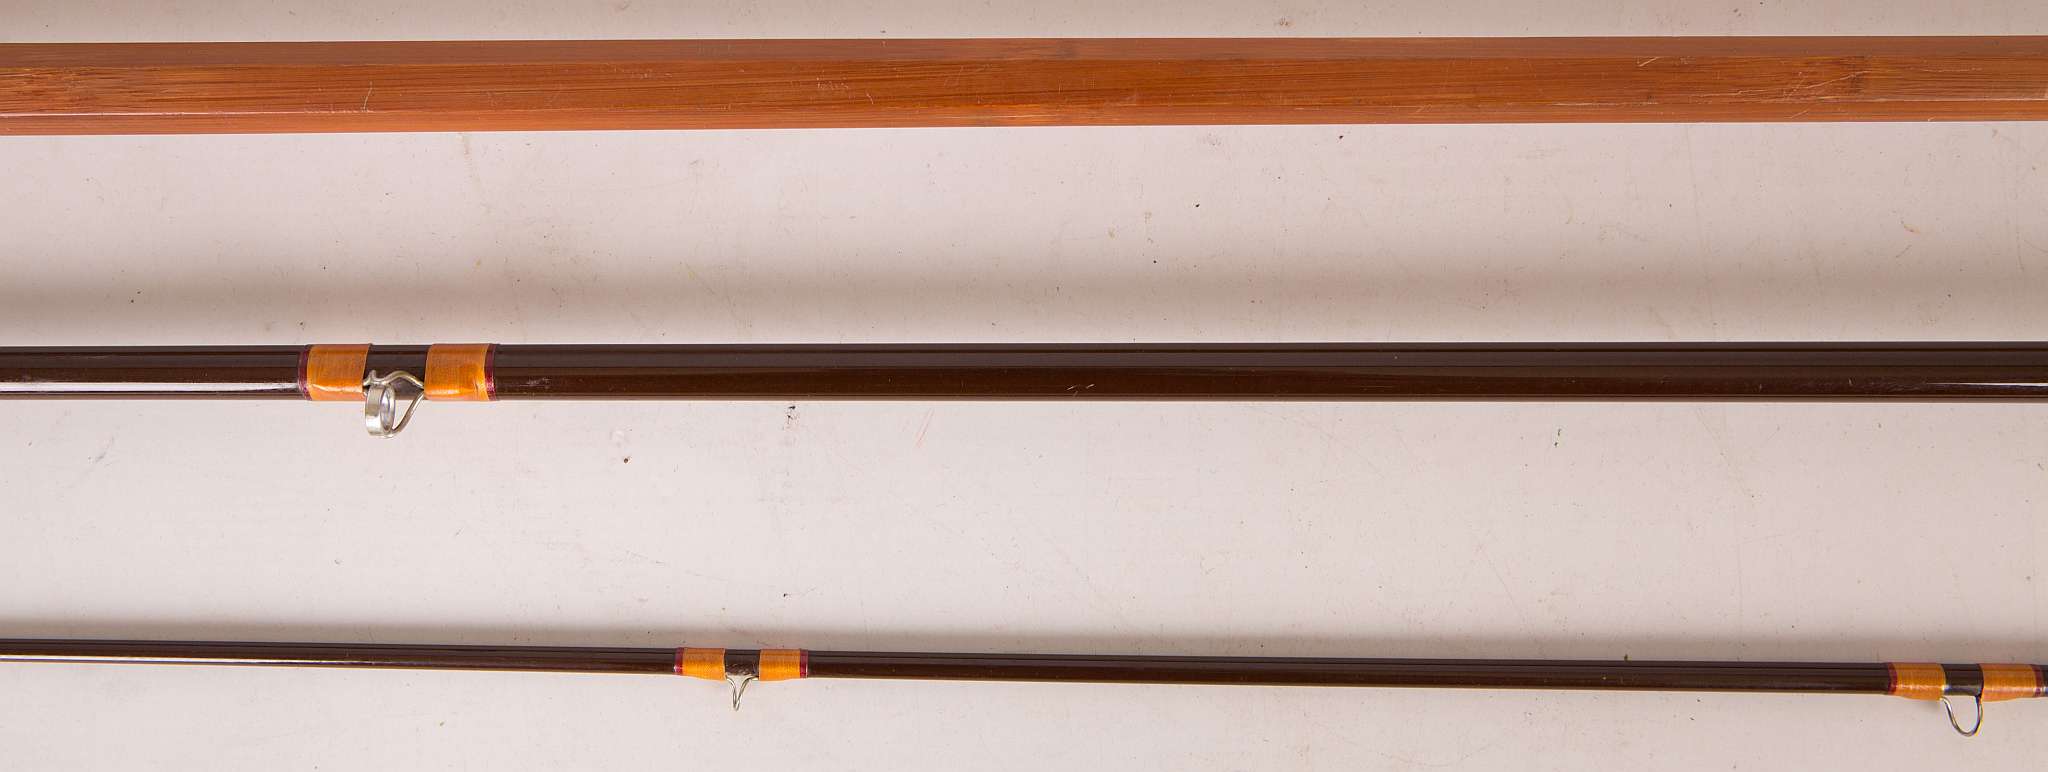 A Hardy Bros. 8½ft hollow glass lightweight trout fly or spinning rod (marked C.L. No. 6), sold - Image 2 of 4